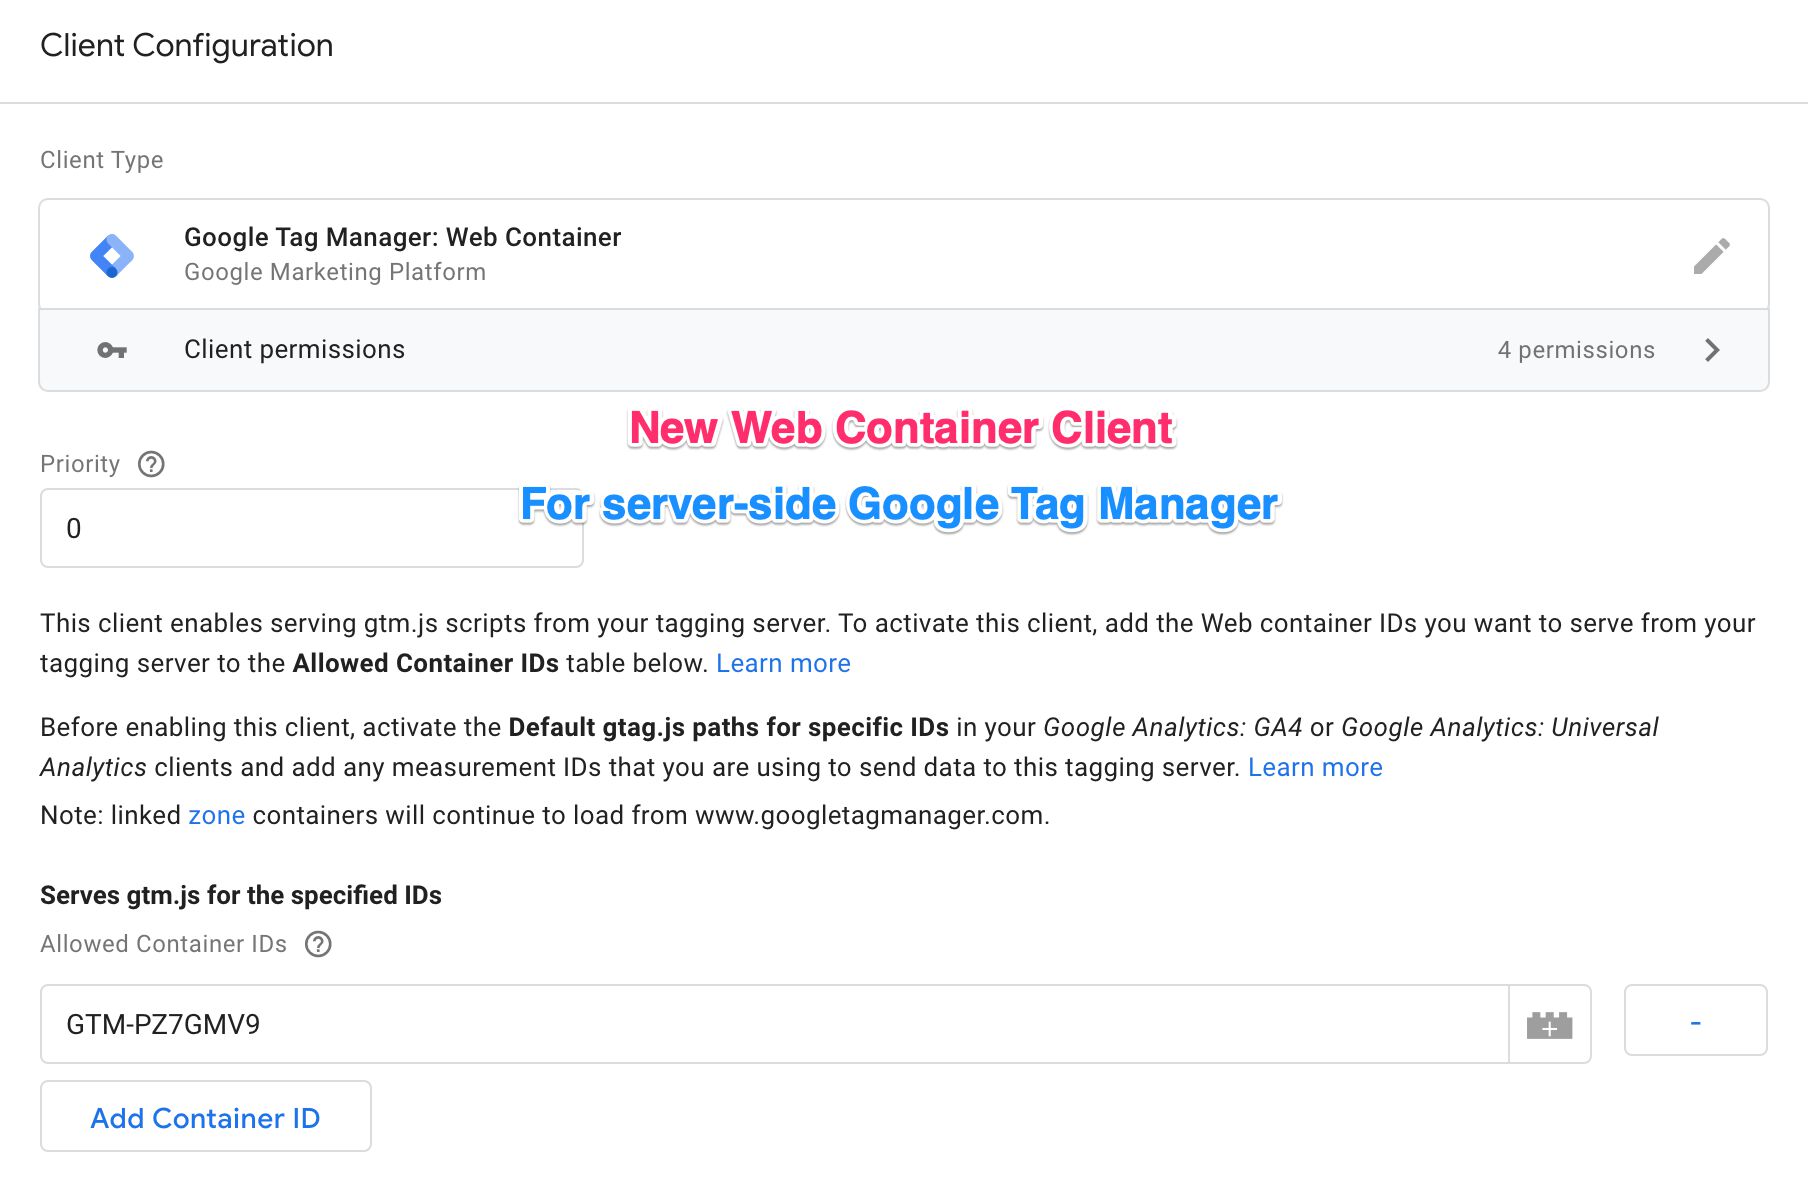 Web container client server-side google tag manager